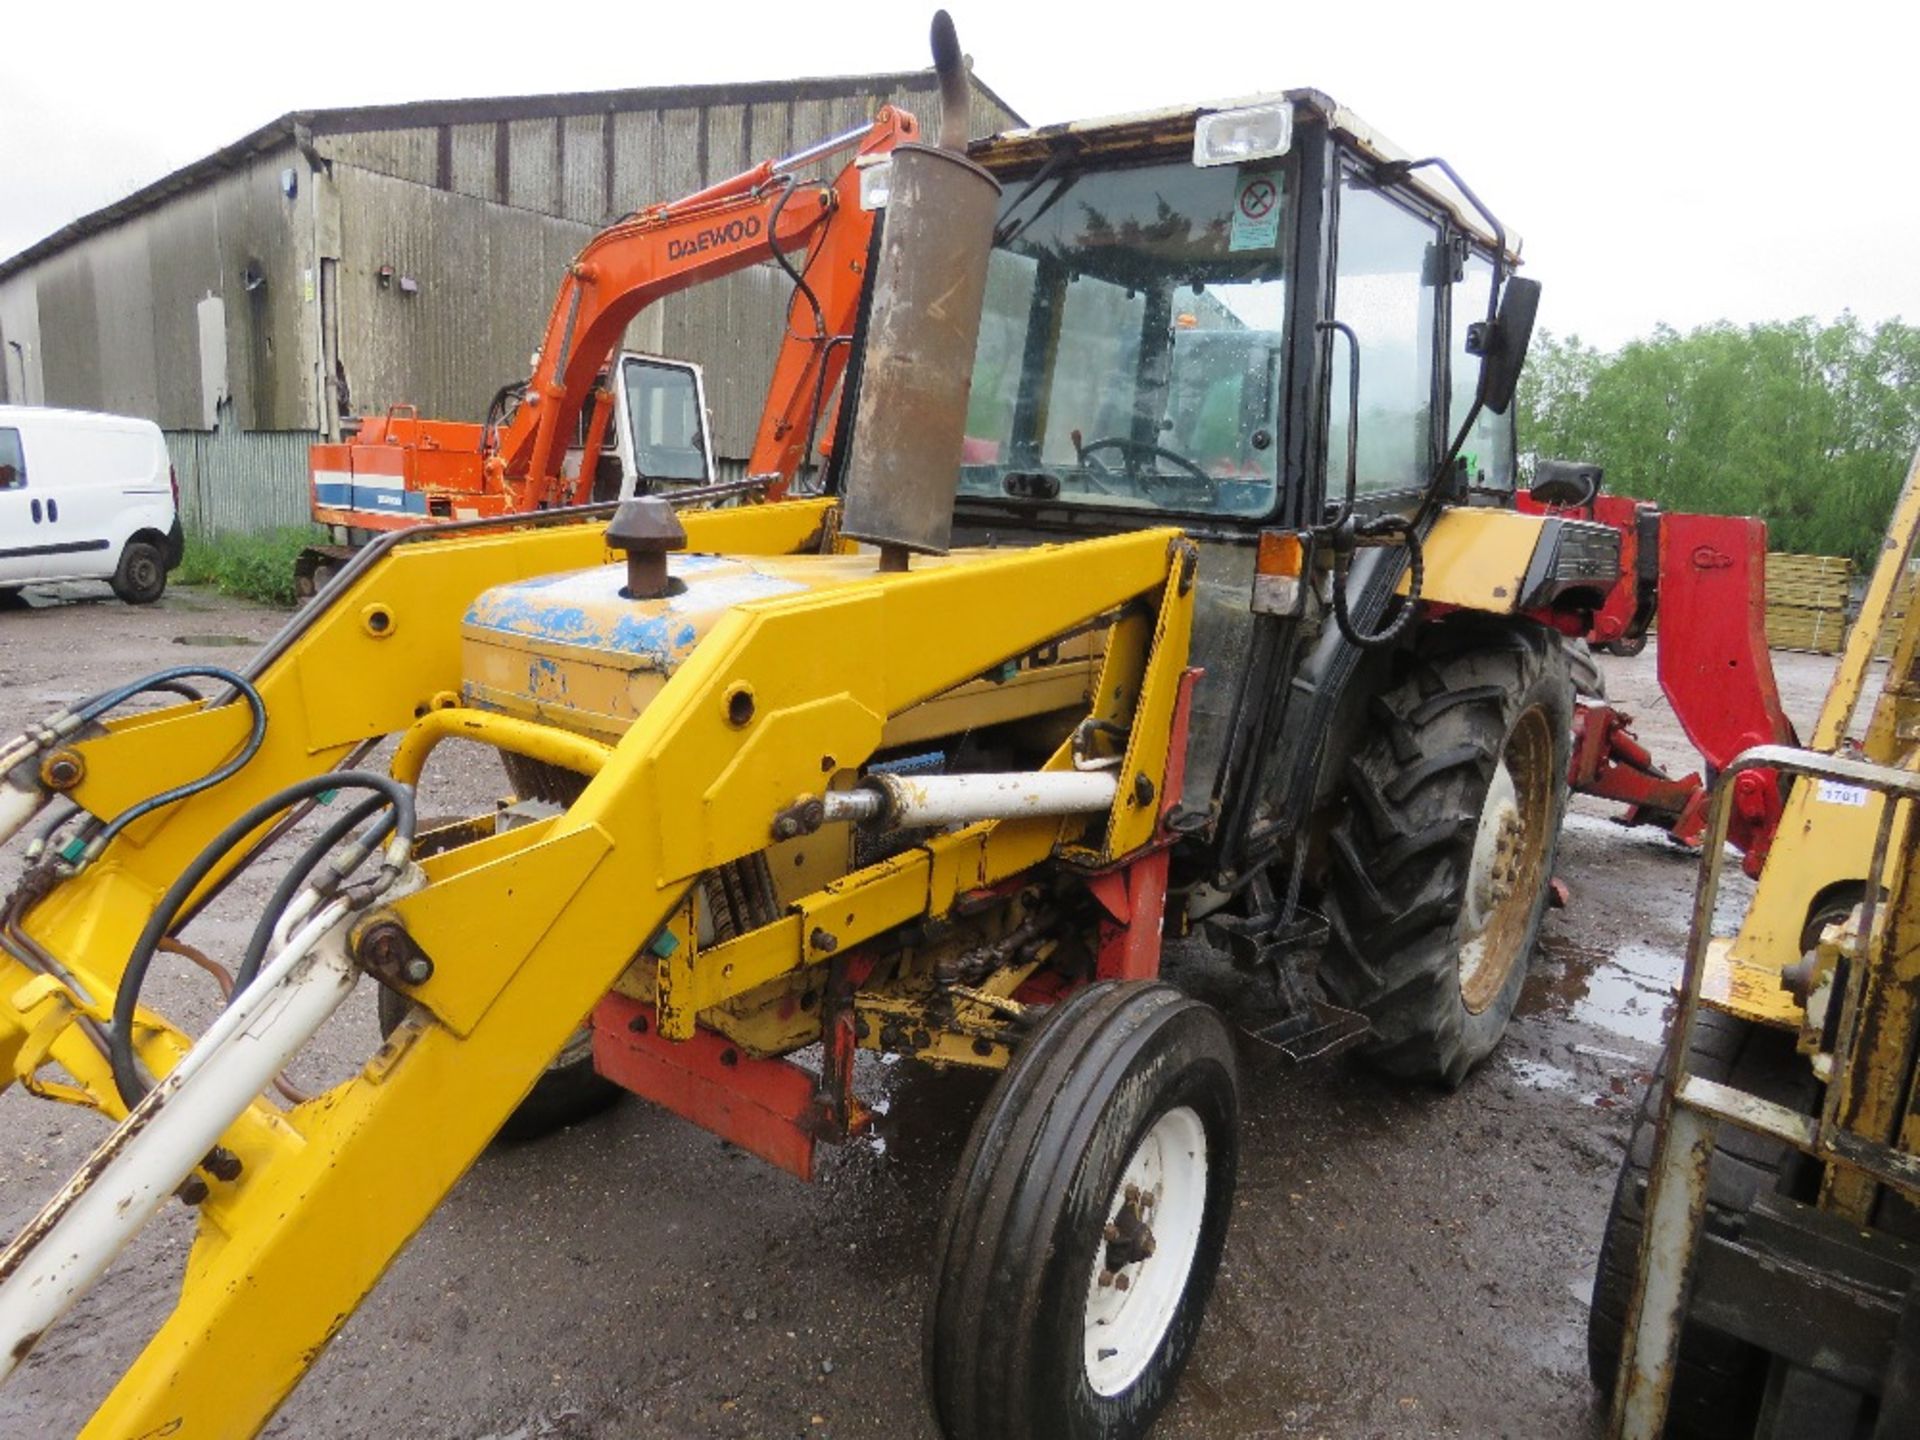 FORD 2WD TRACTOR WITH FOREND LOADER. REG:F940 WFW (LOG BOOK TO APPLY FOR). COMES WITH BUCKET, PALLET - Image 4 of 17